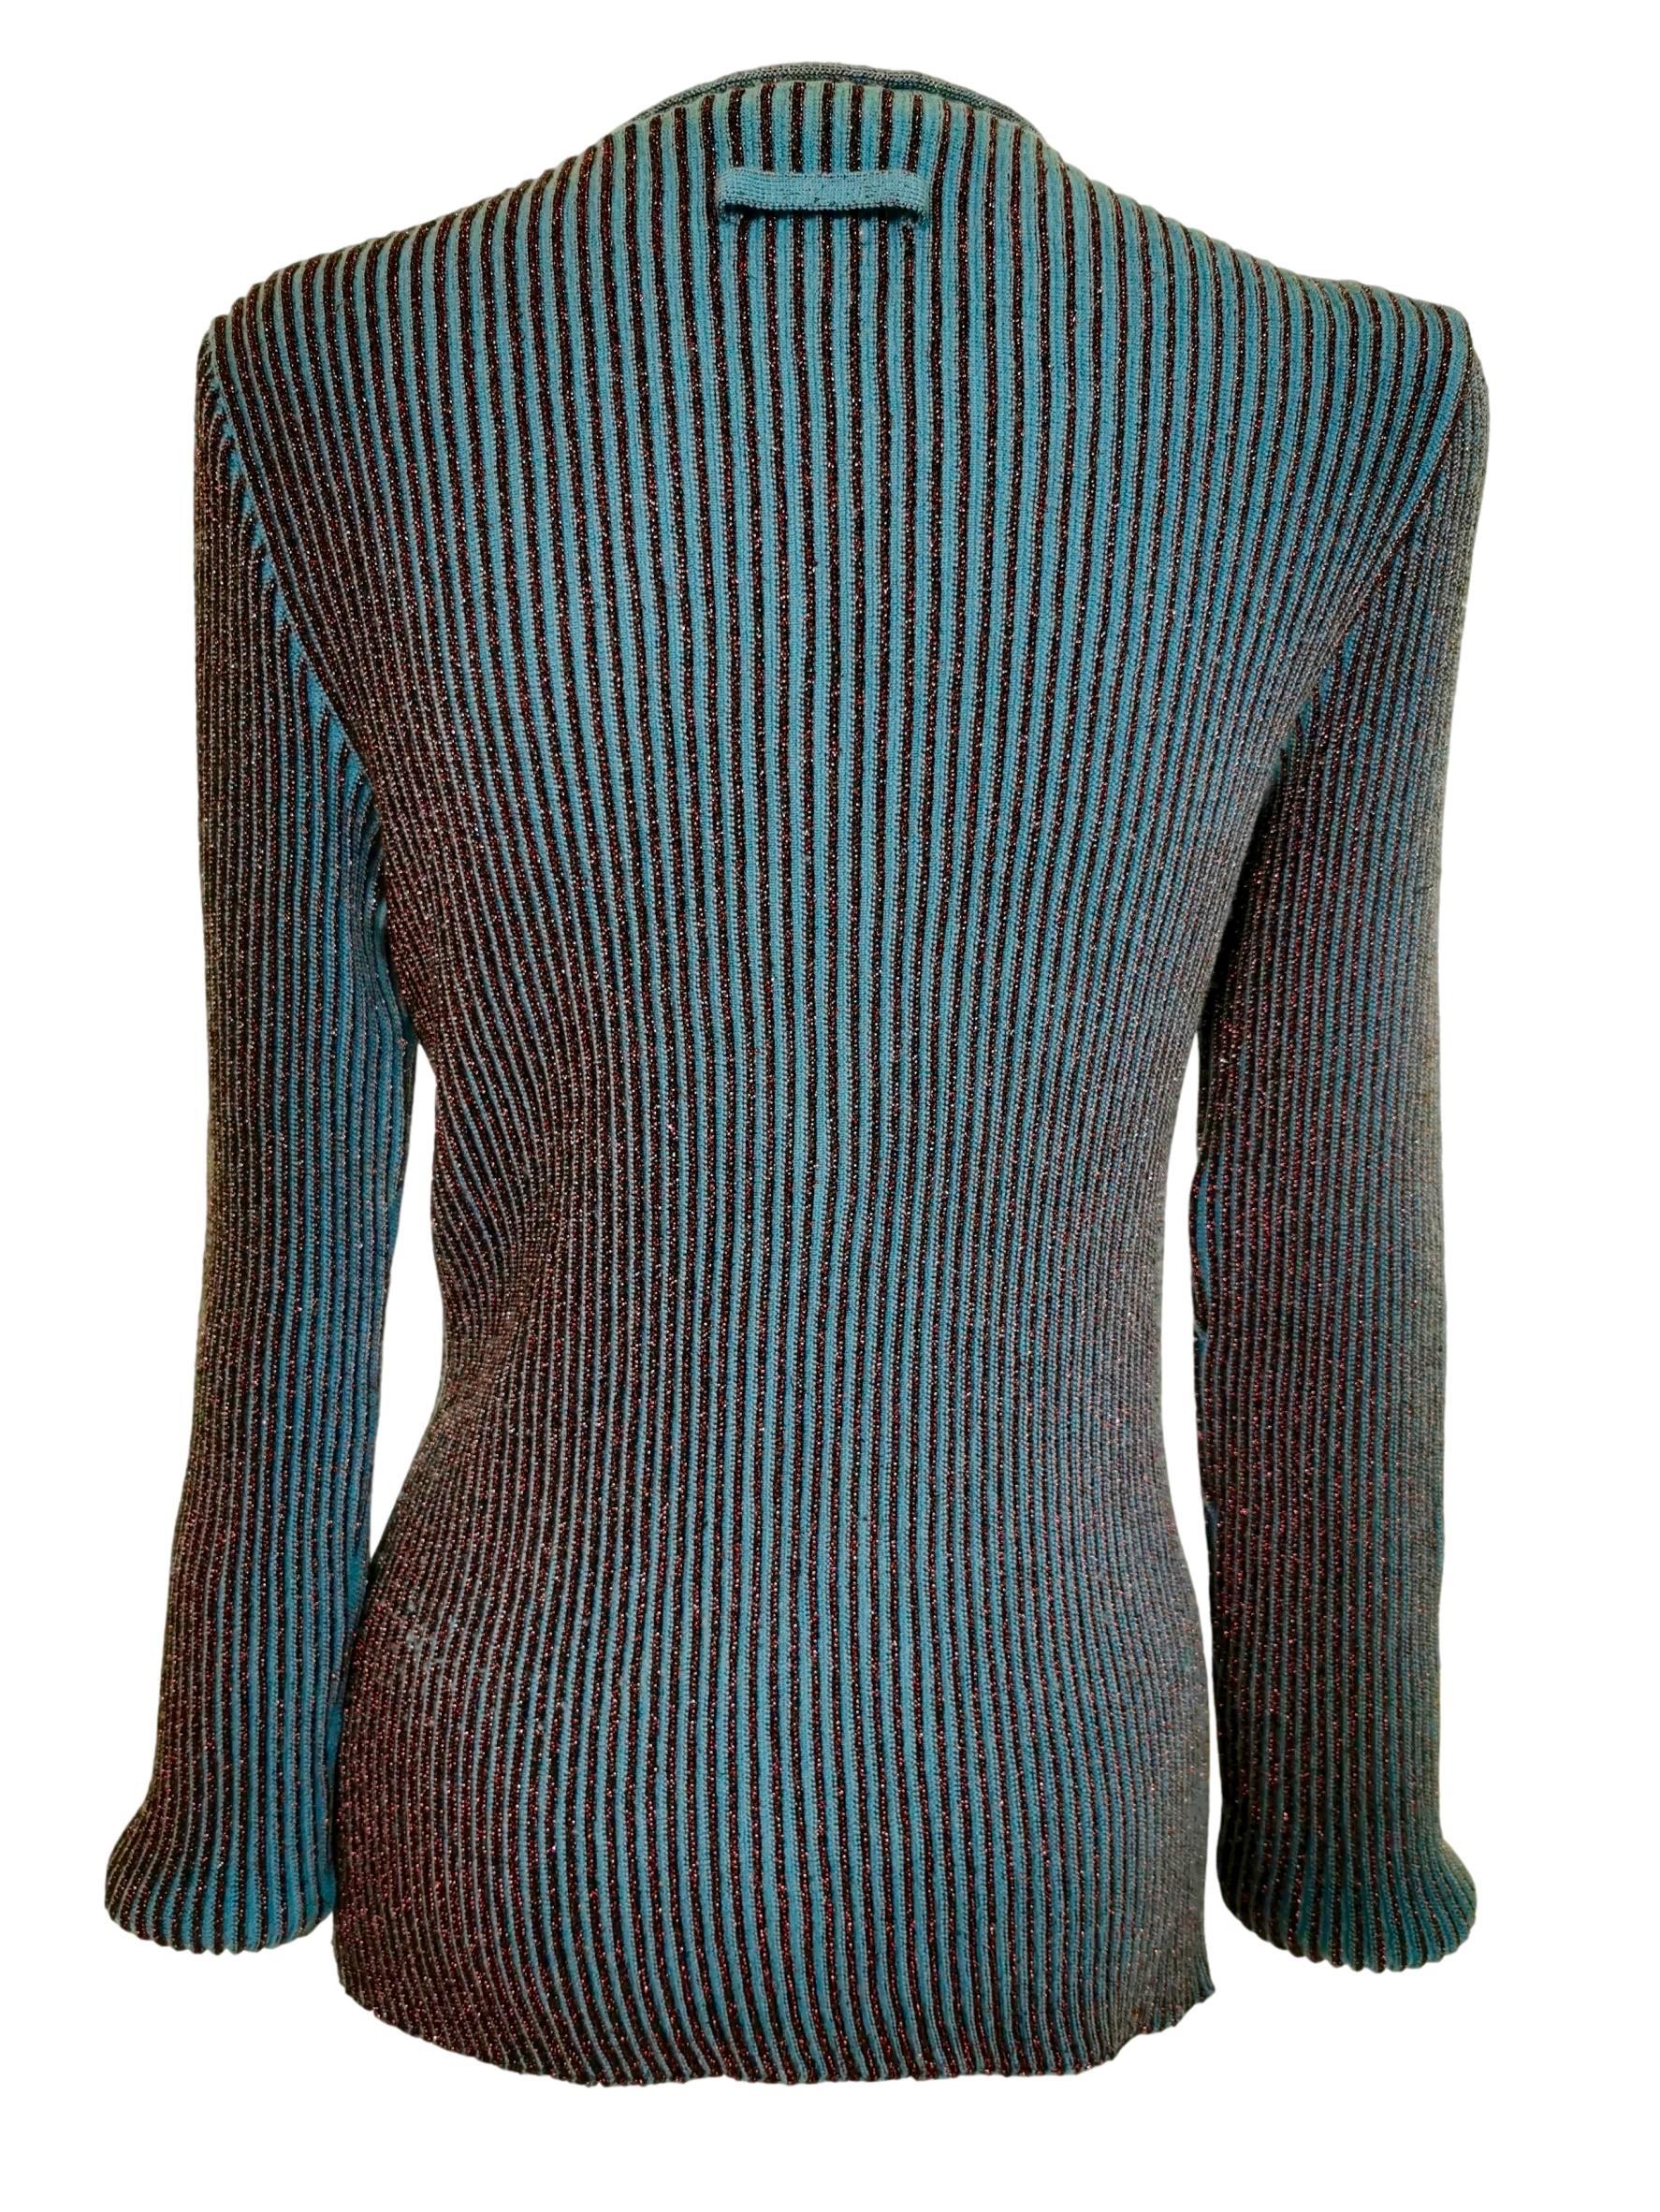 Jean Paul Gaultier Homme Label Ribbed Sweater with Lurex